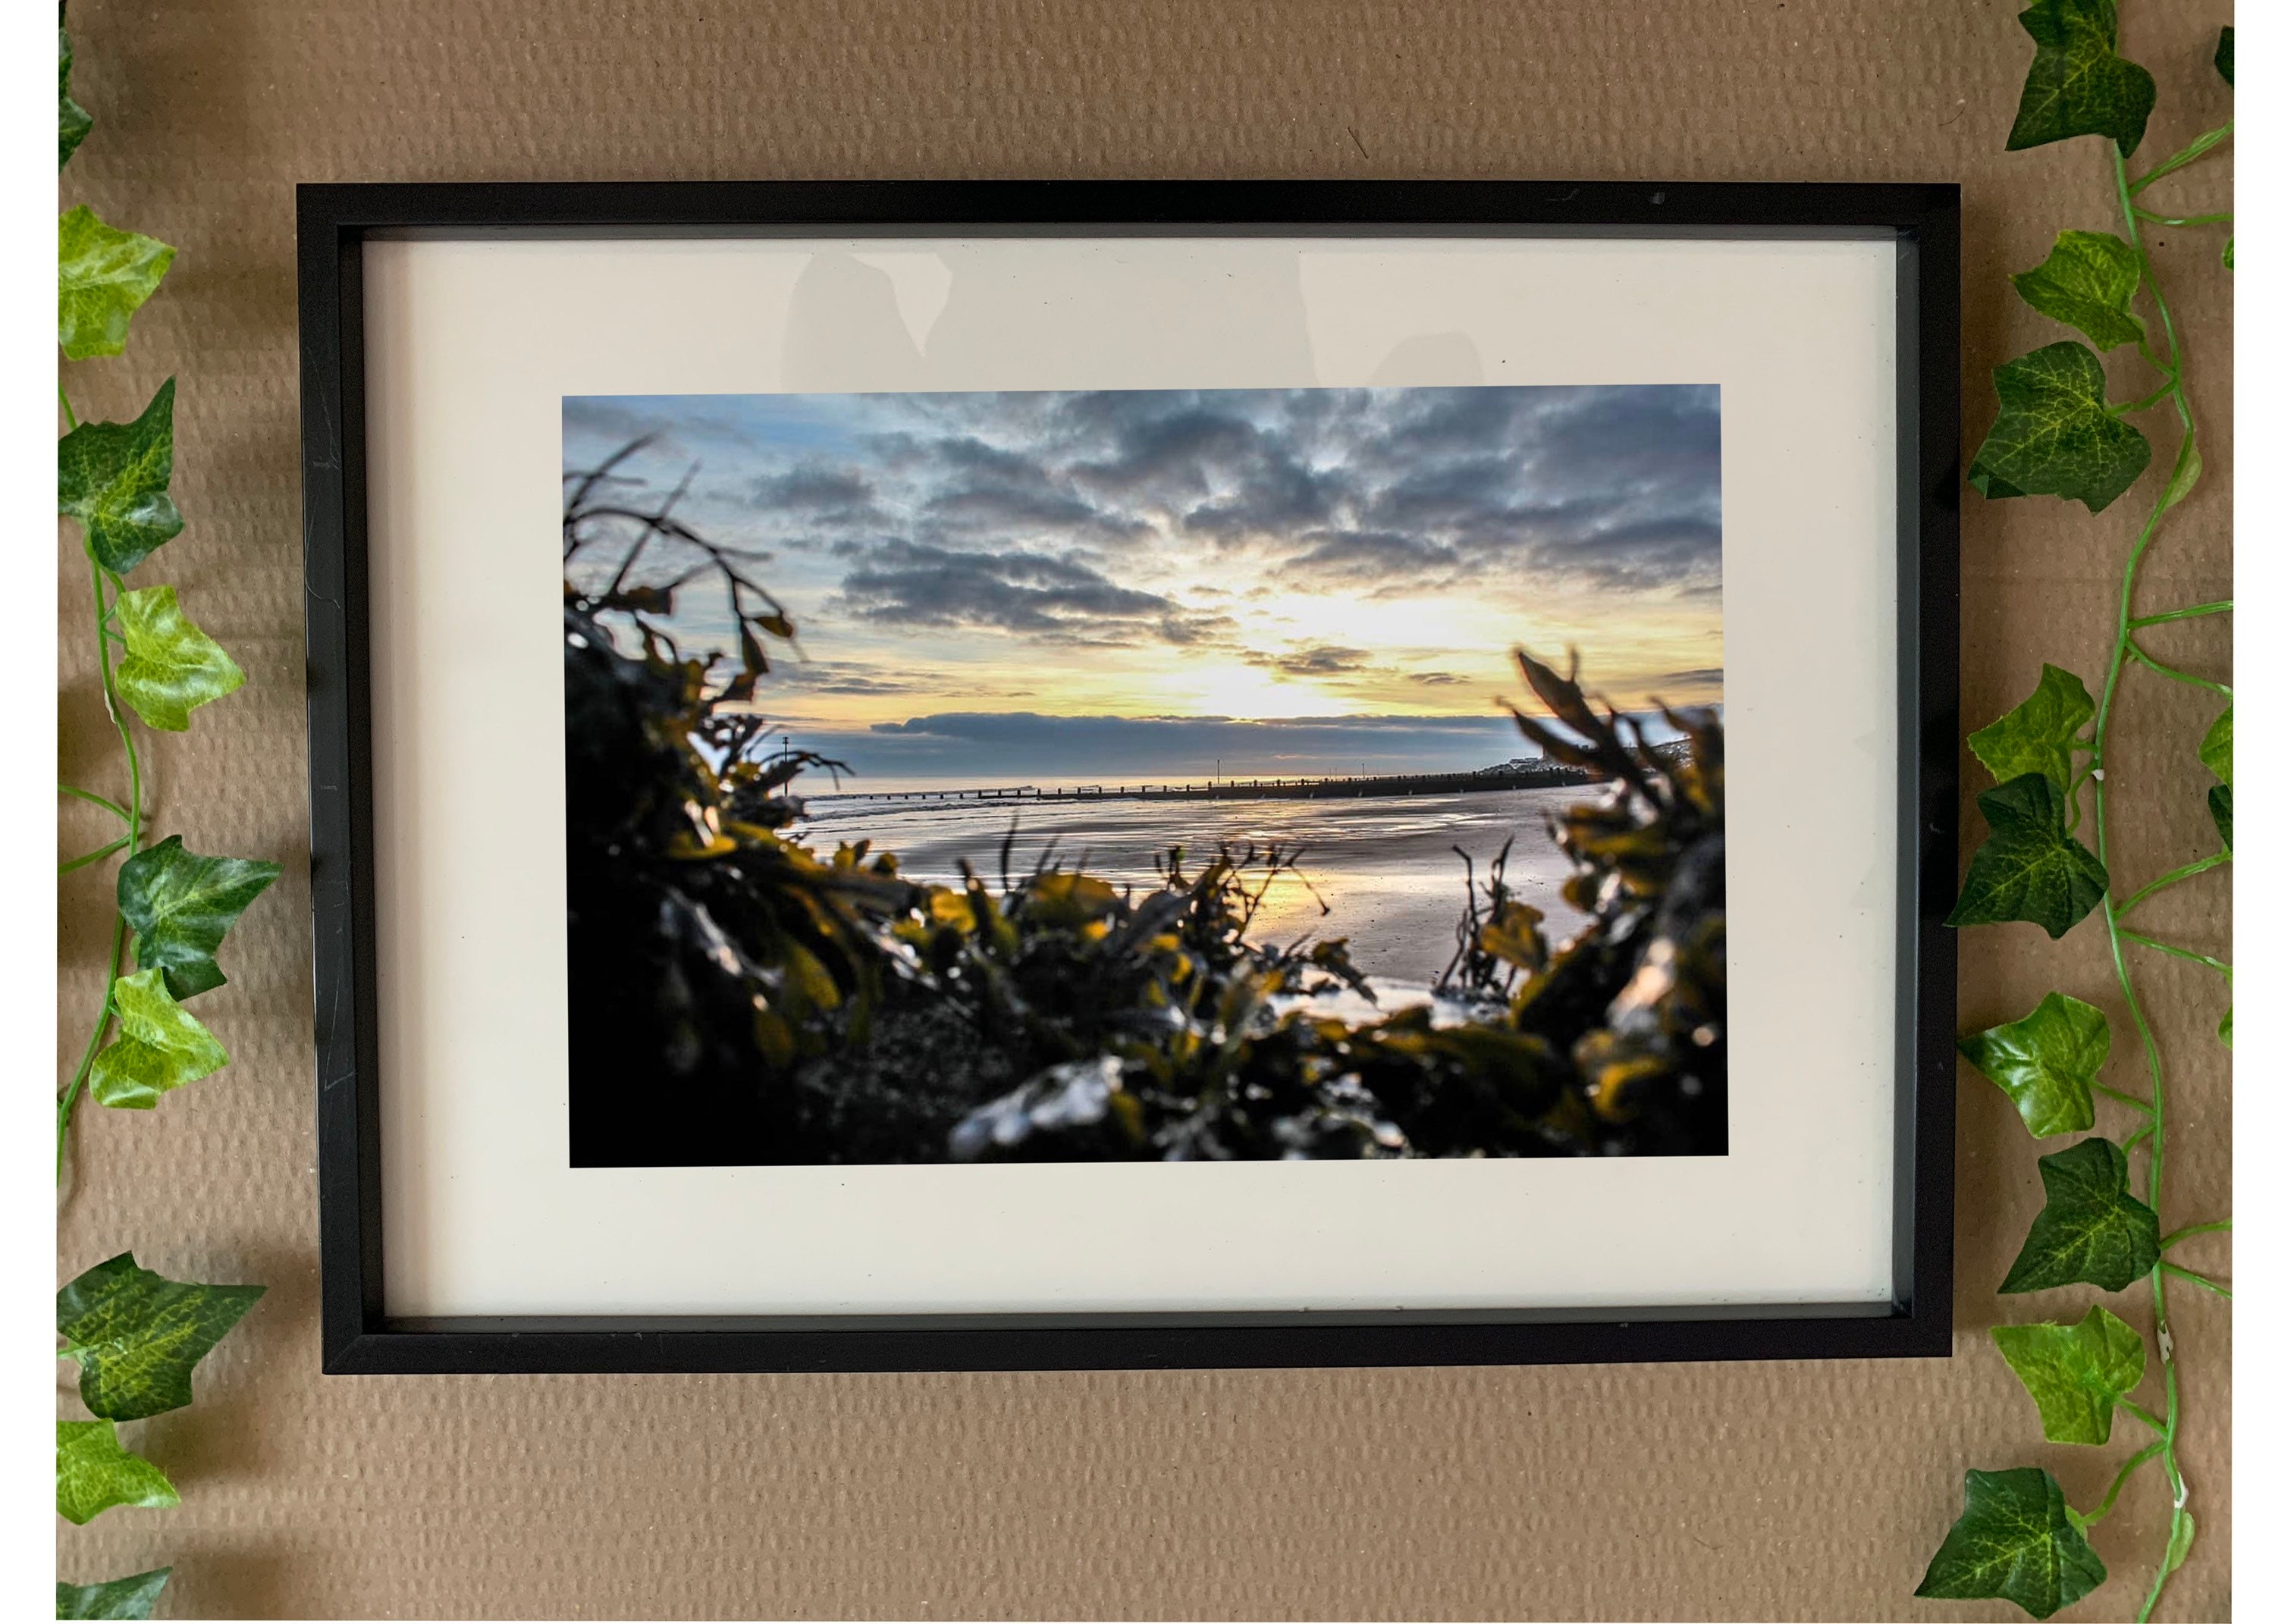 Download Gorgeous sunny day beach framed a4 photo in a3 frame | Etsy